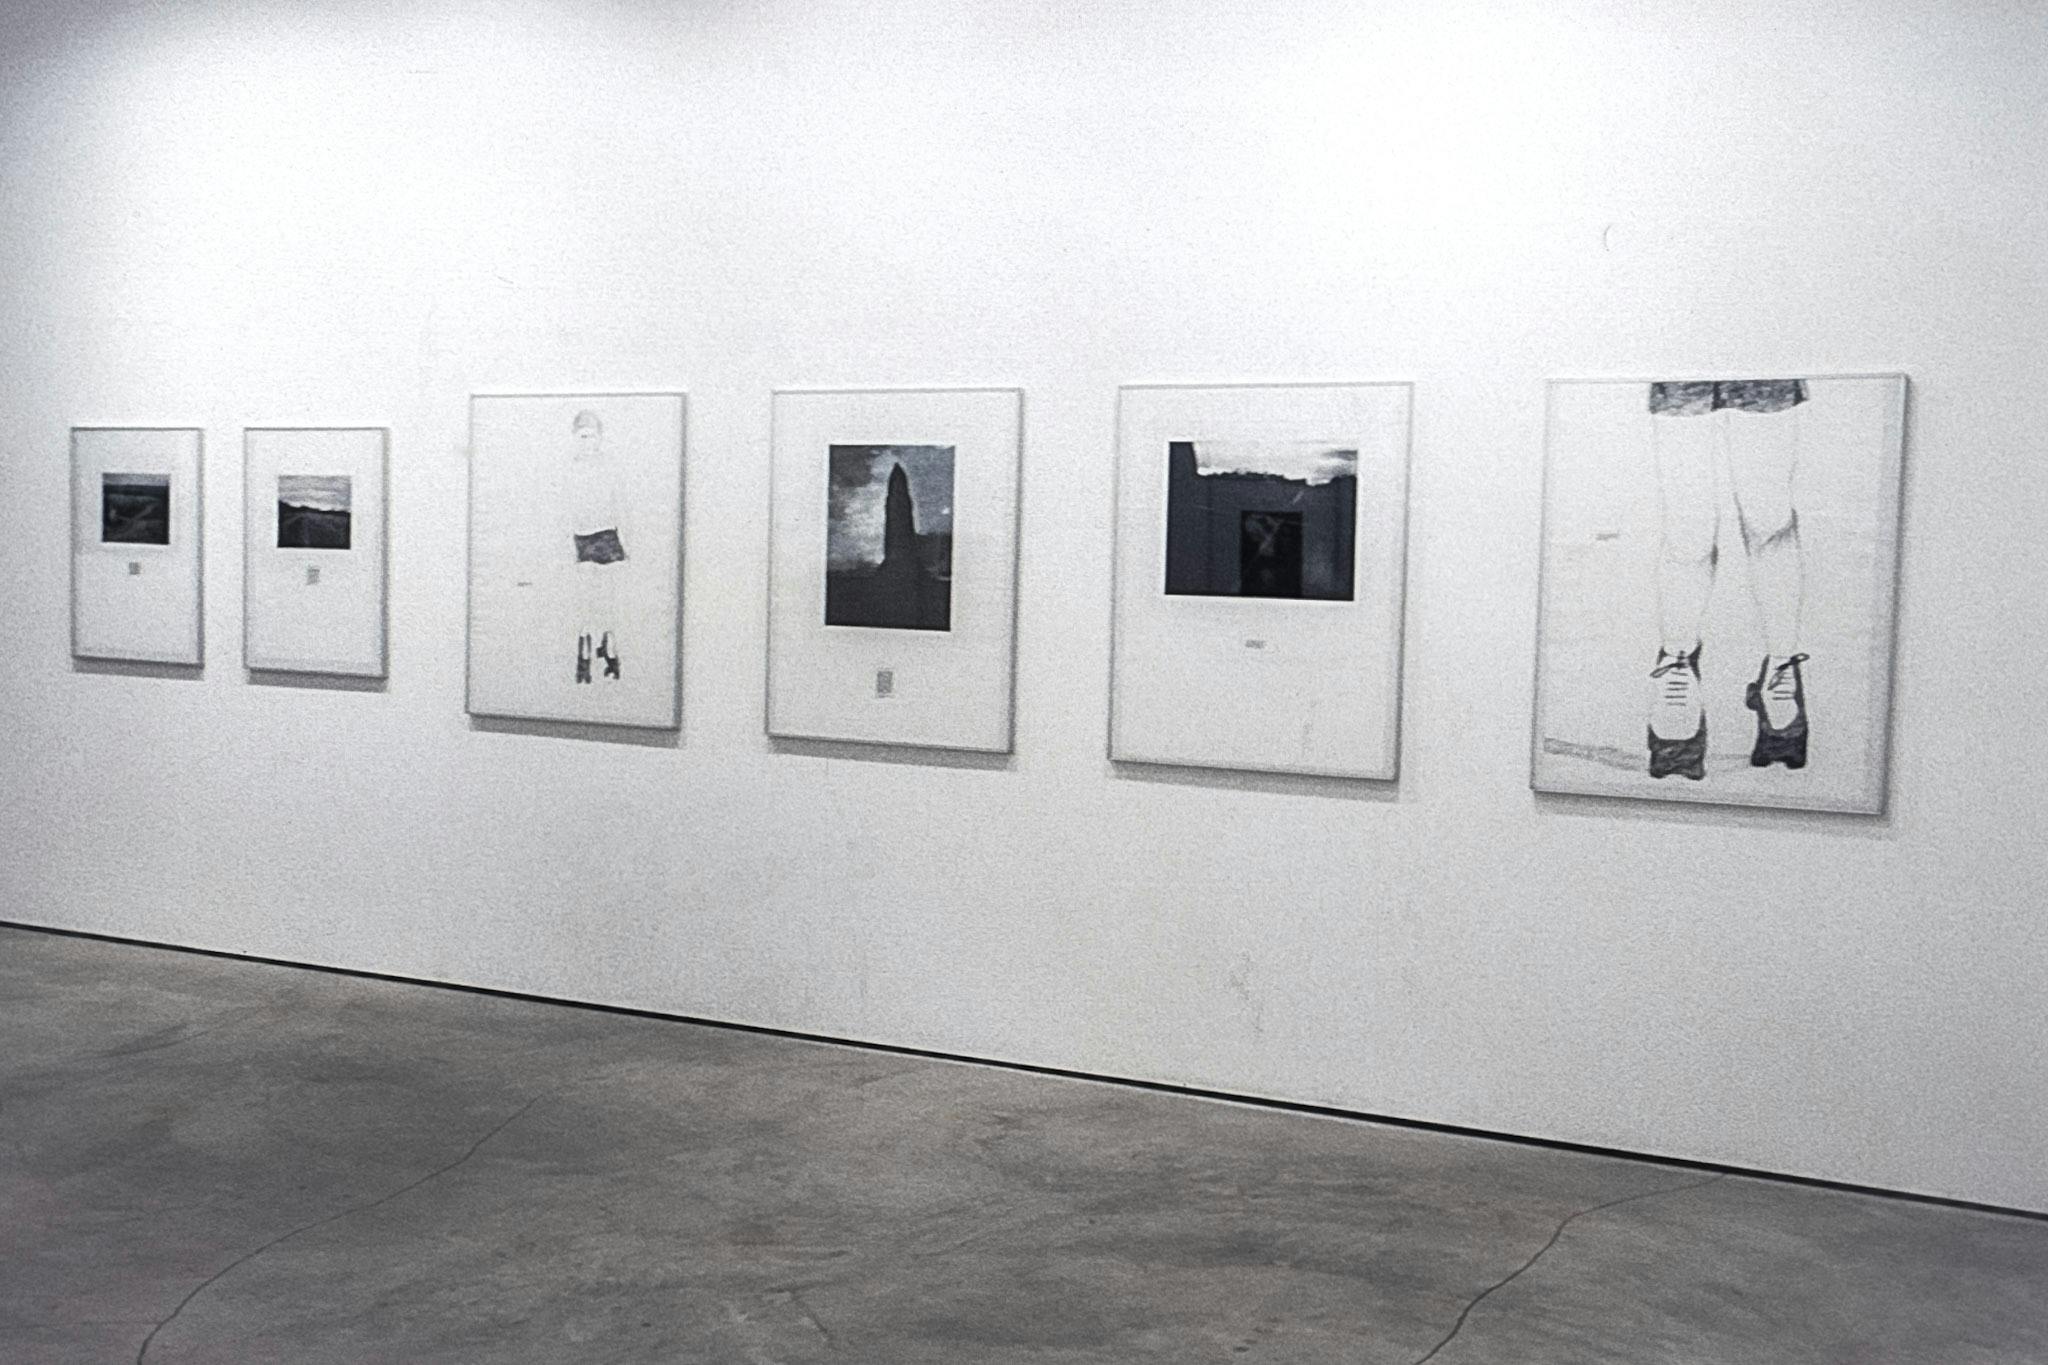 A gallery space with work on the white walls. Most of the works visible are mostly-white illustrations in metal frames. In the background, a partial black and white photo of a stadium can be seen.